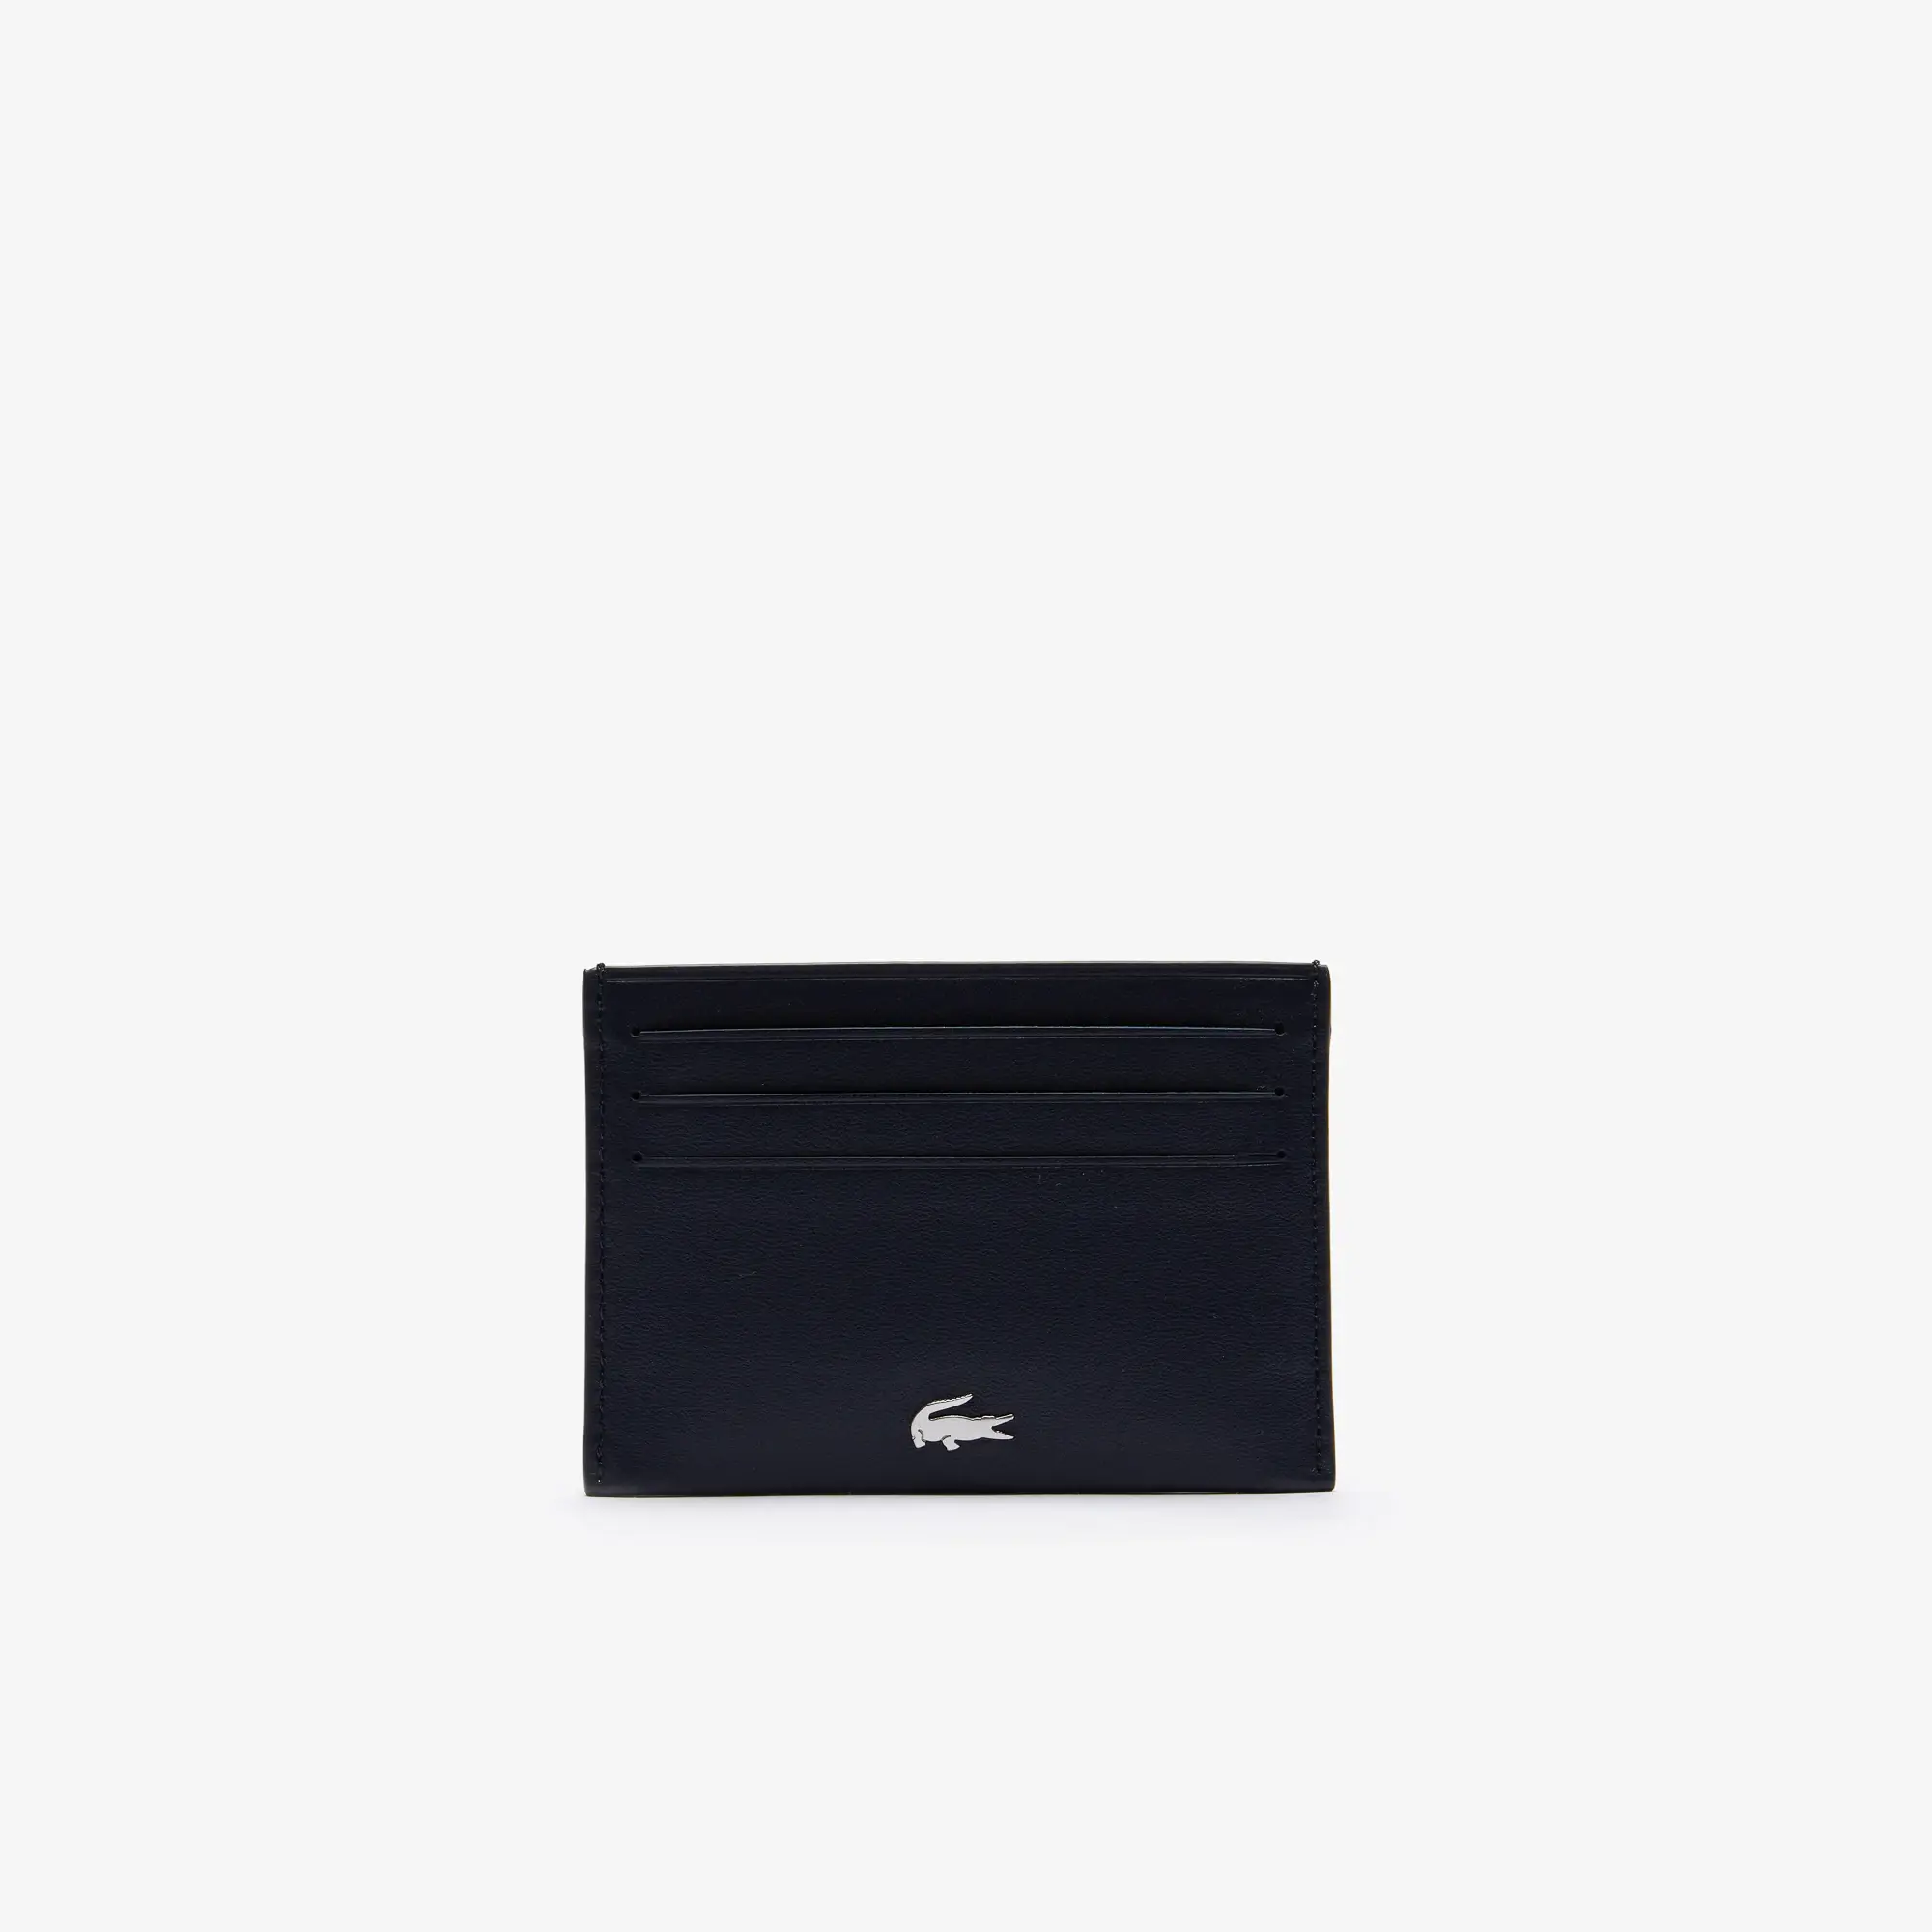 Lacoste Unisex Fitzgerald Leather Card Holder. 1